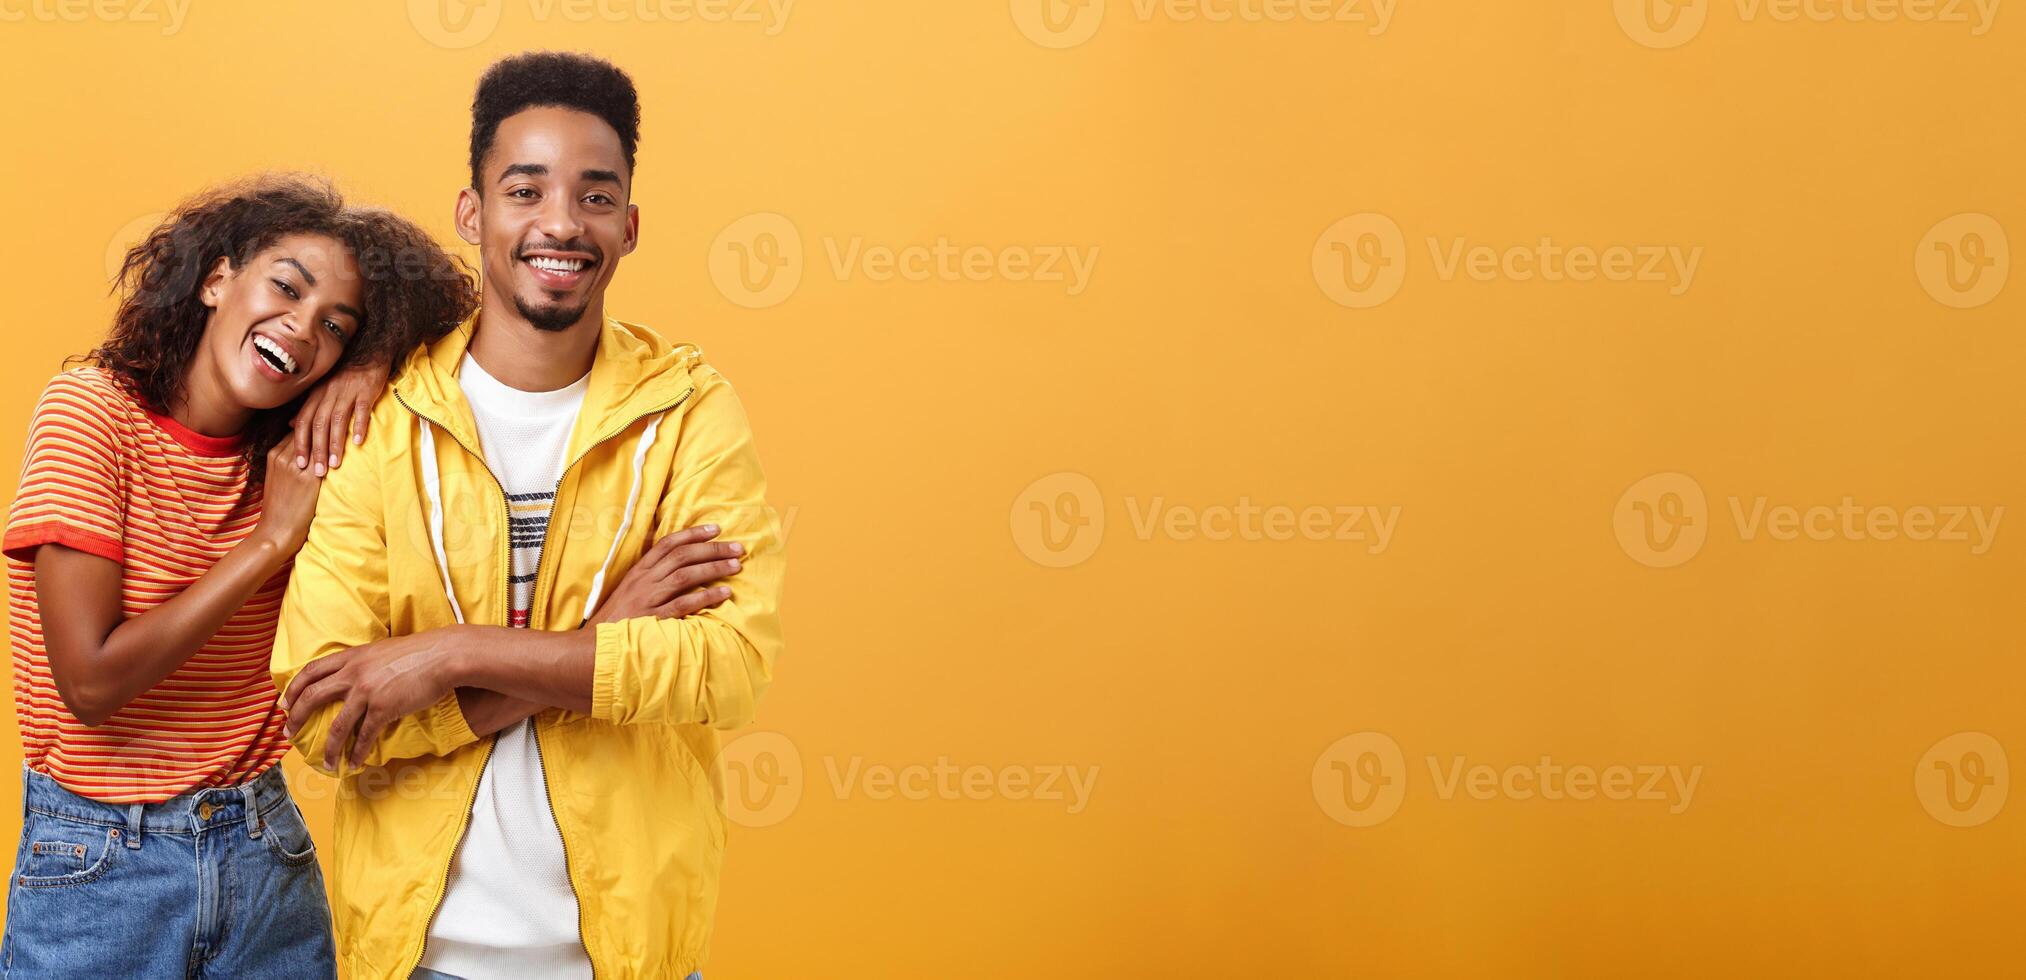 Awesome when boyfriend is best friend. Portrait of charming friendly african american woman leaning on guy touching his shoulder feeling happy they together and she can rely on posing orange wall photo